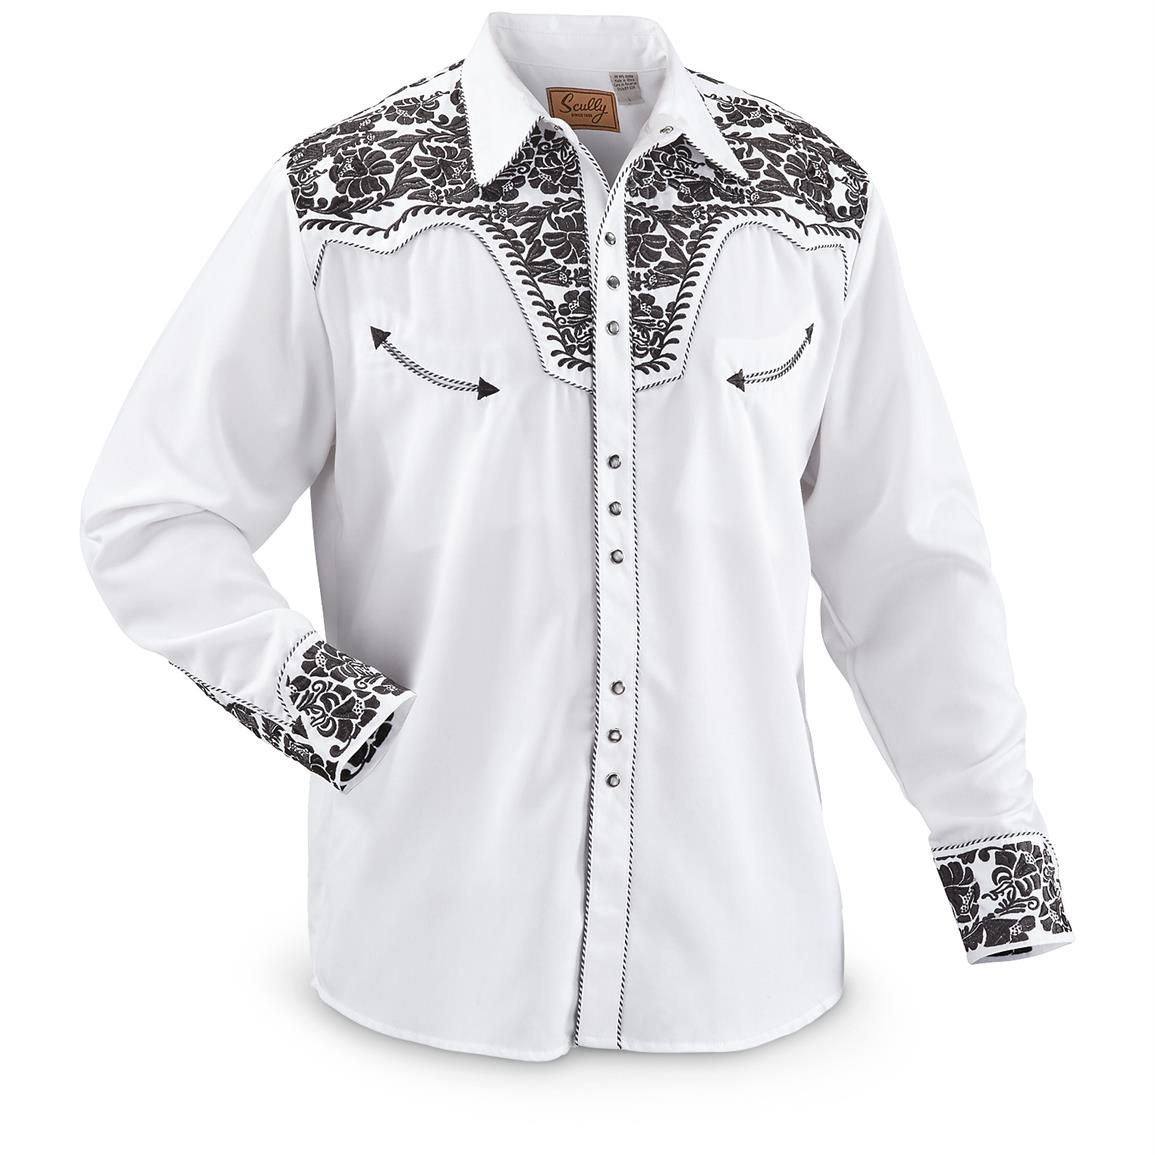 Scully Men's Embroidered Shirt - 229297, Shirts at Sportsman's Guide